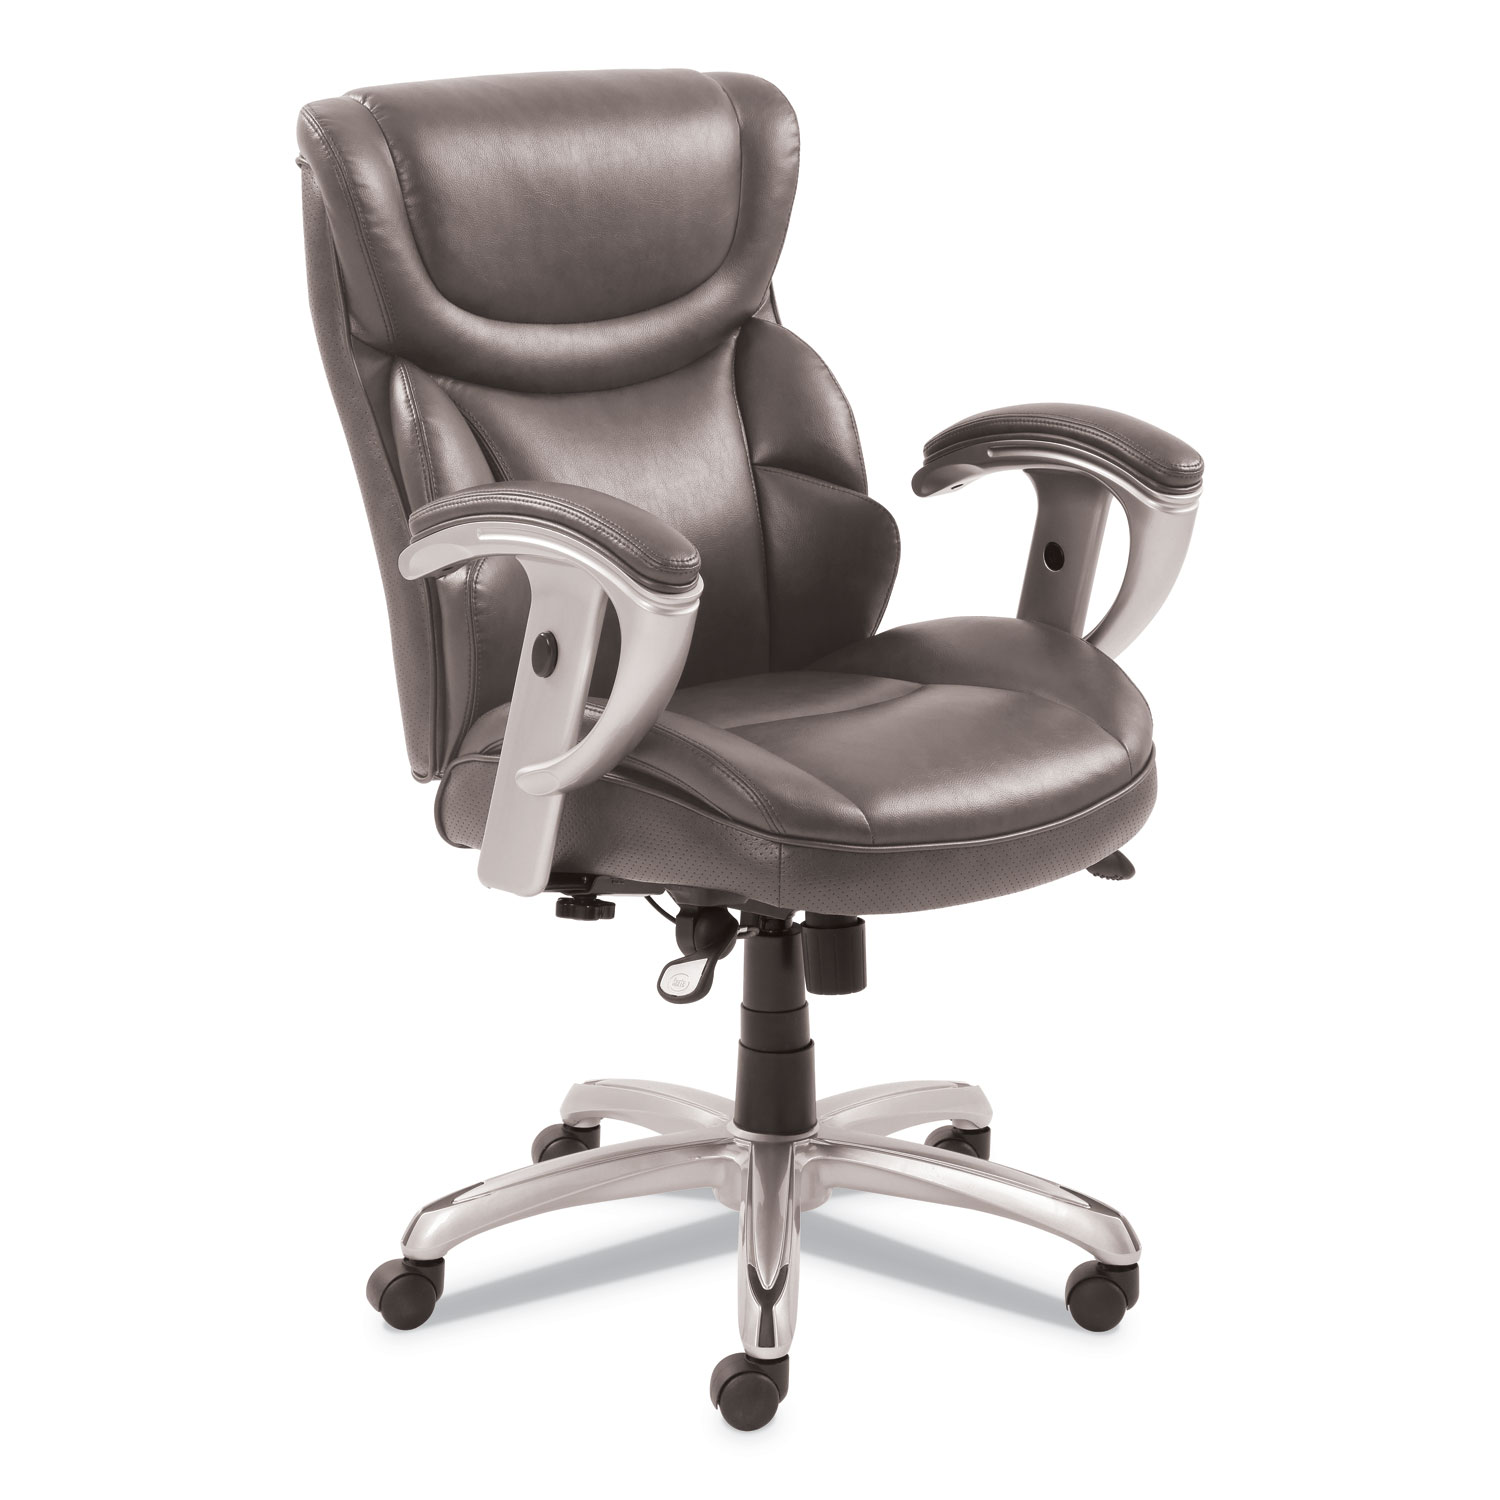  SertaPedic 49711GRY Emerson Task Chair, Supports up to 300 lbs., Gray Seat/Gray Back, Silver Base (SRJ49711GRY) 